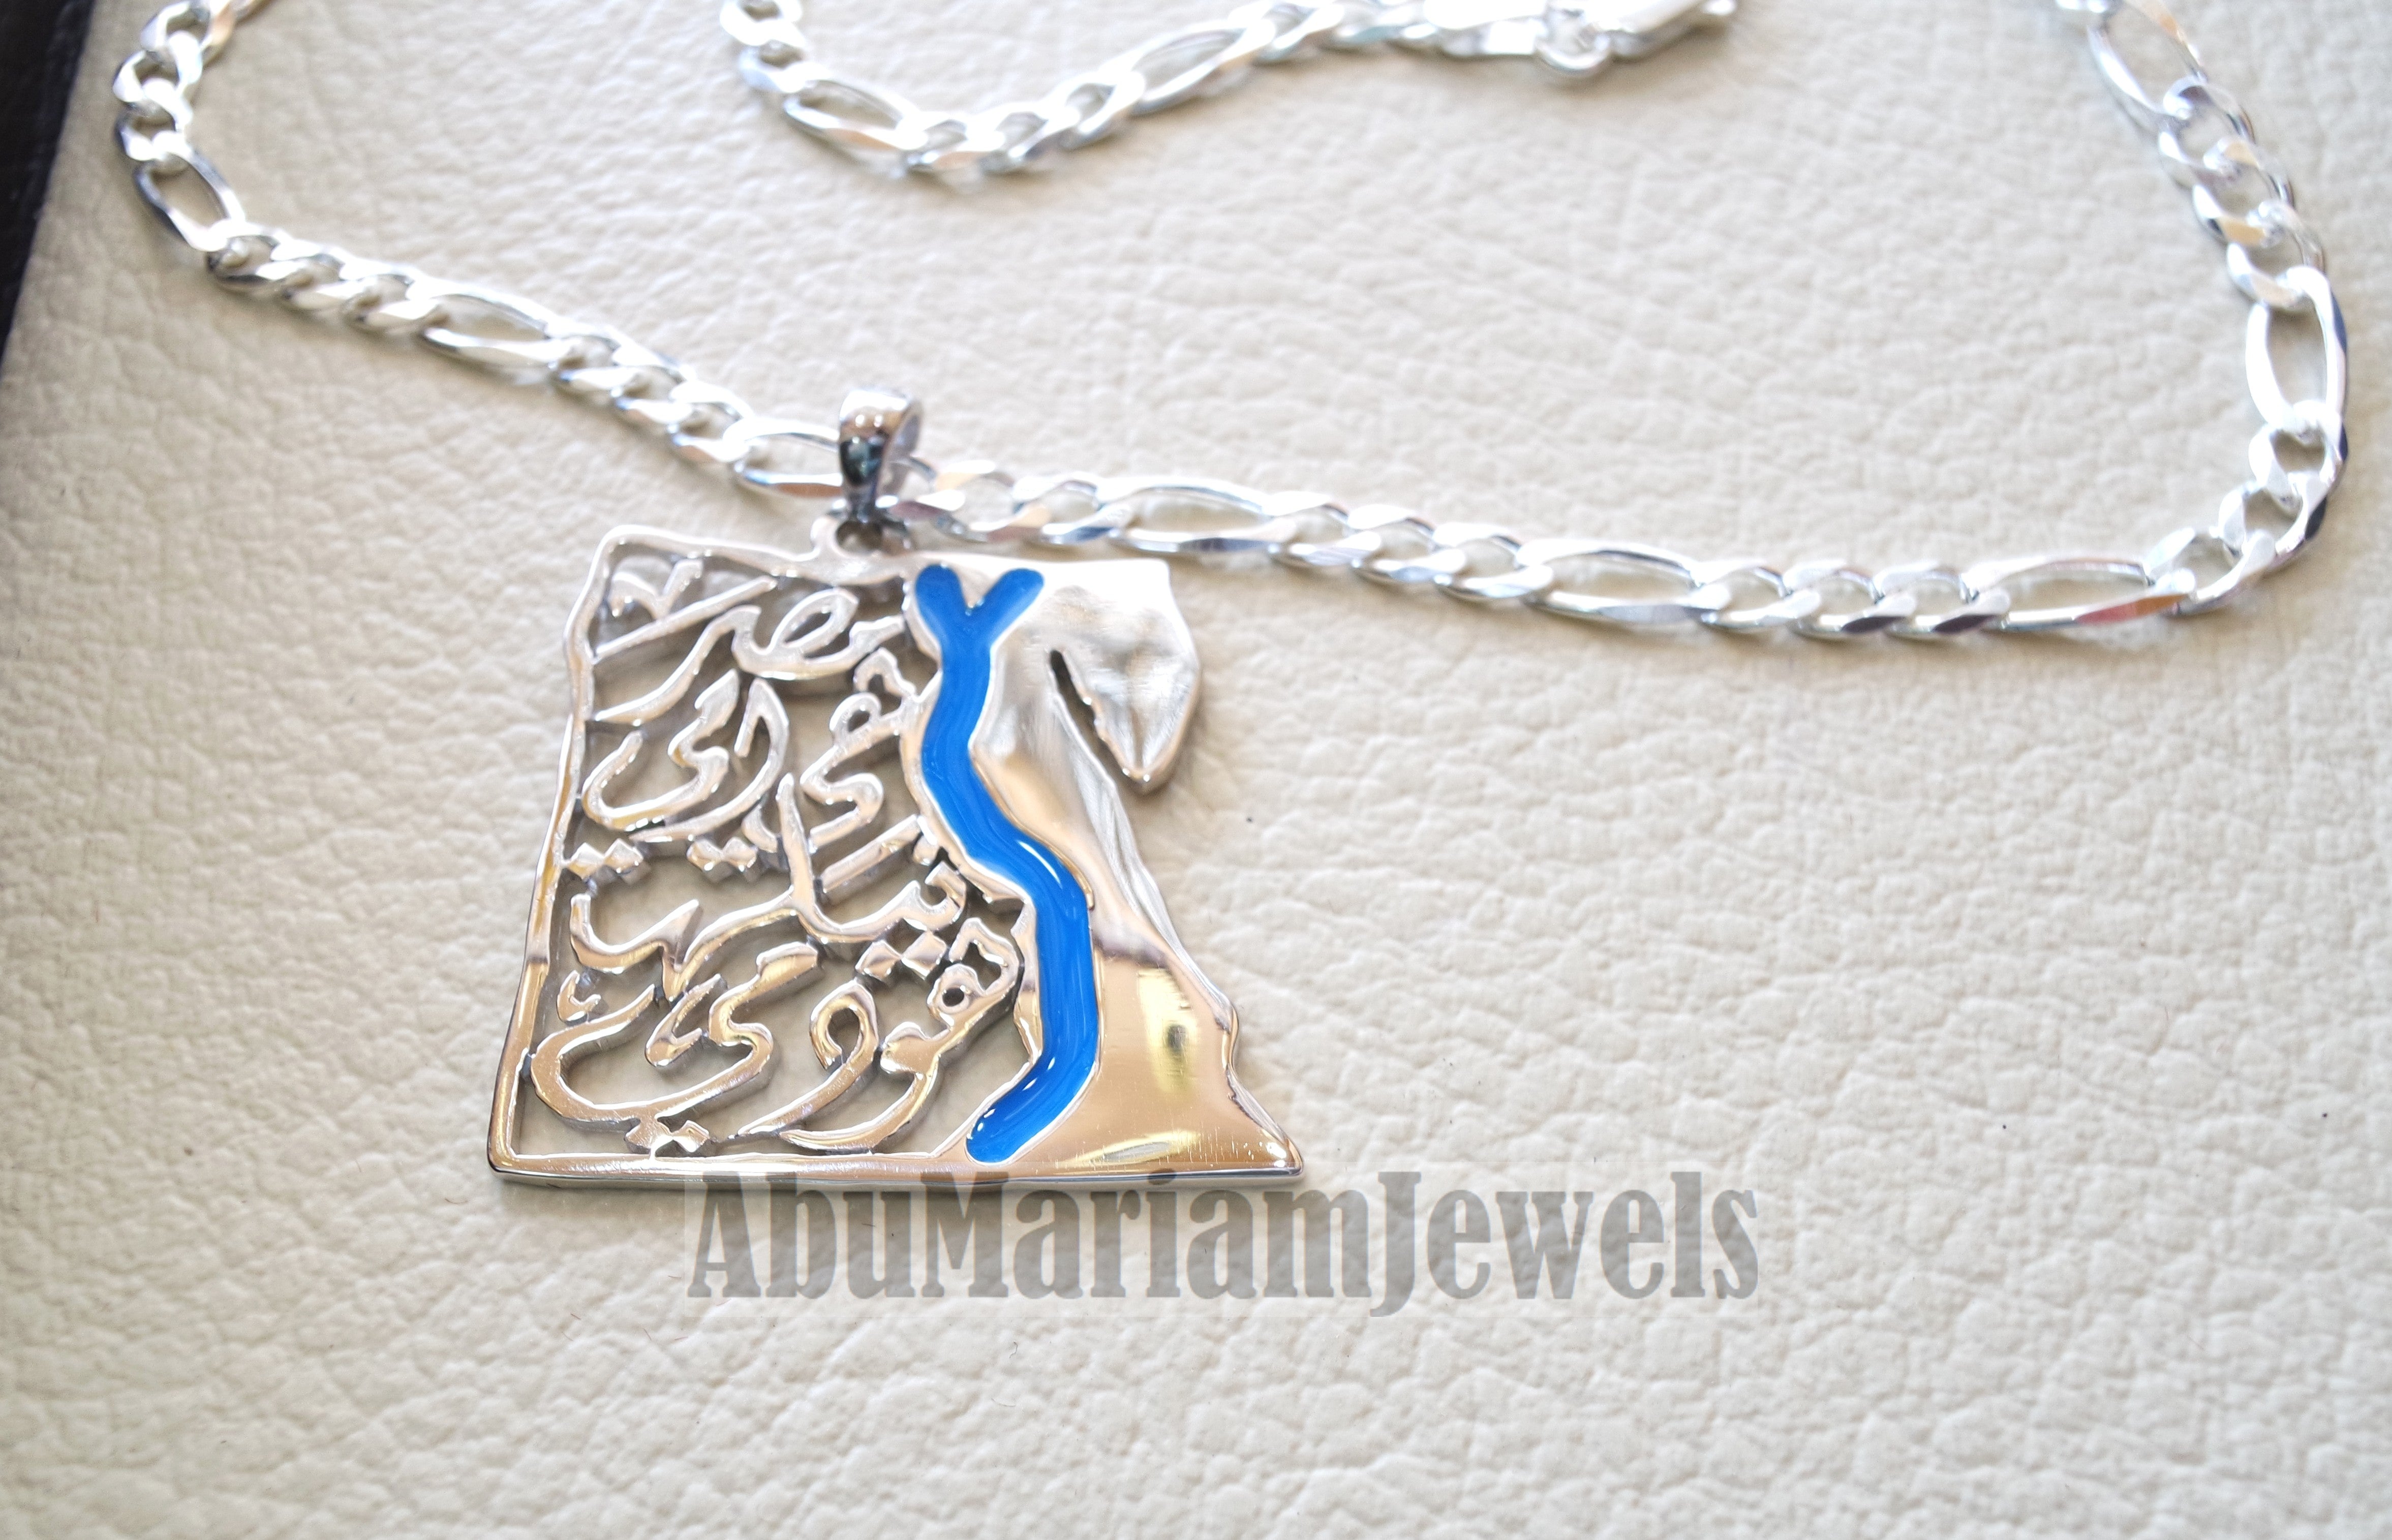 Egypt map necklace with thick chain traditional verse sterling silver 925 calligraphy blue enamel jewelry arabic fast shipping خريطة مصر